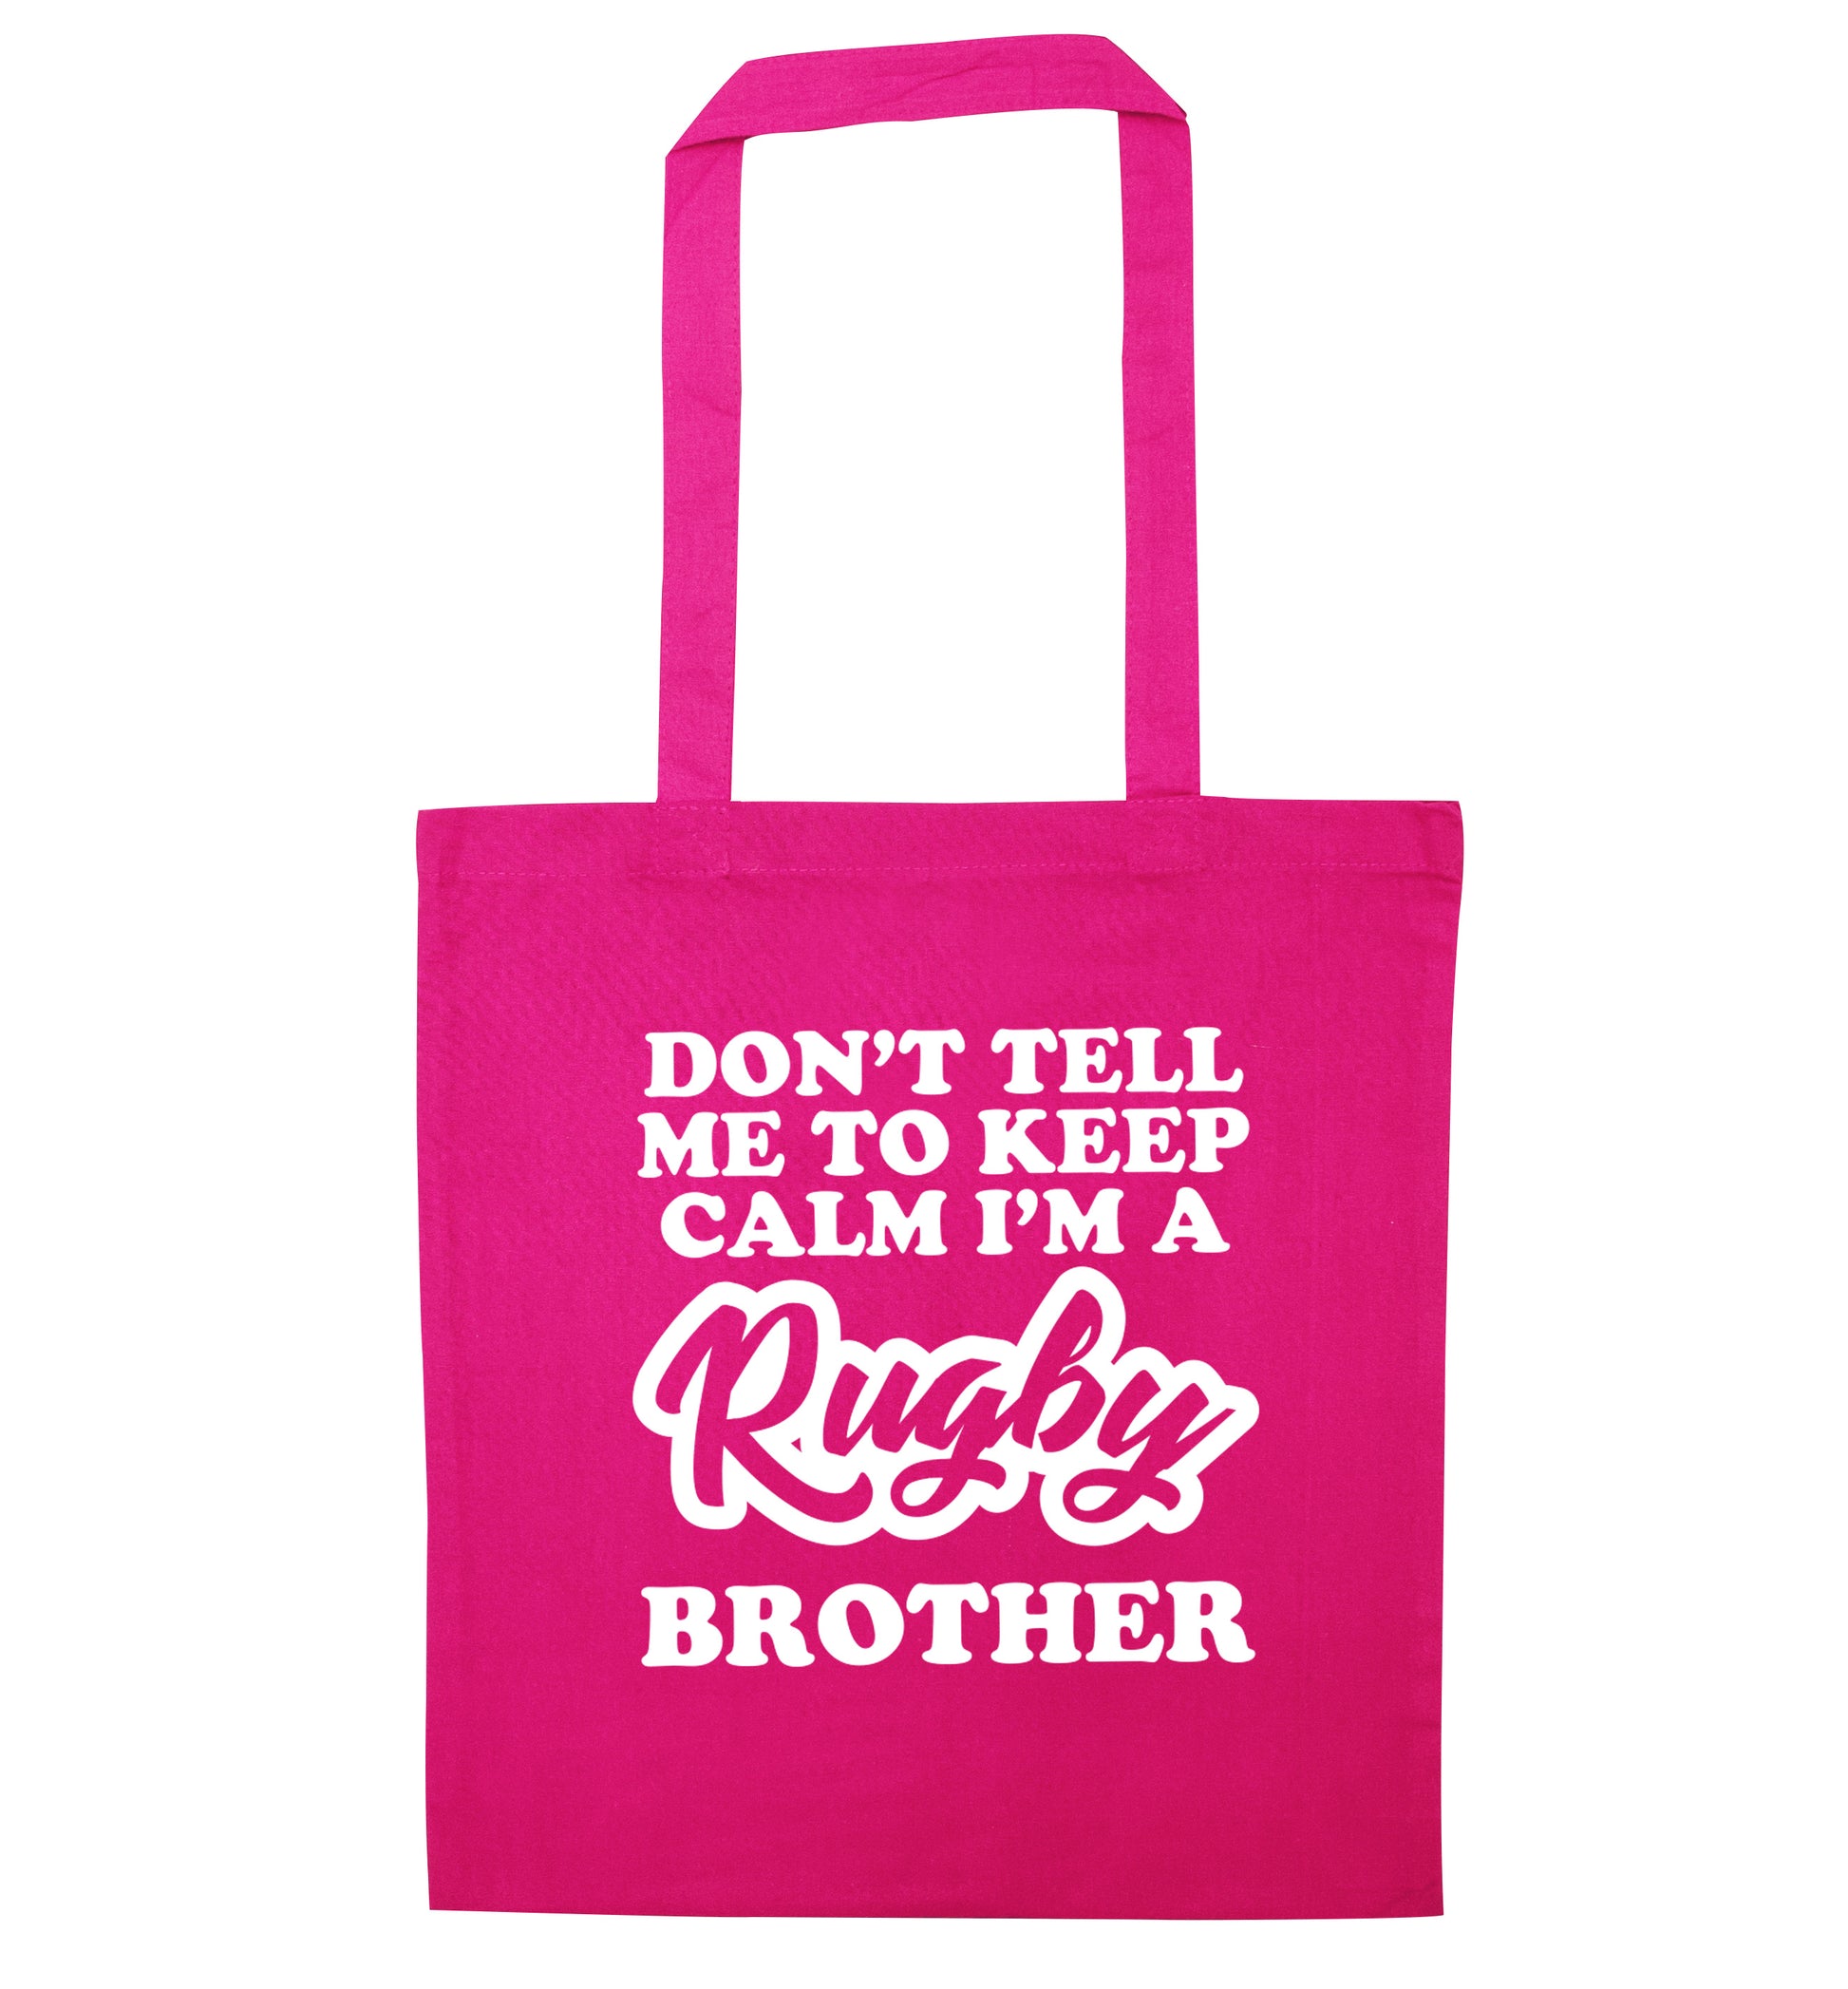 Don't tell me keep calm I'm a rugby brother pink tote bag